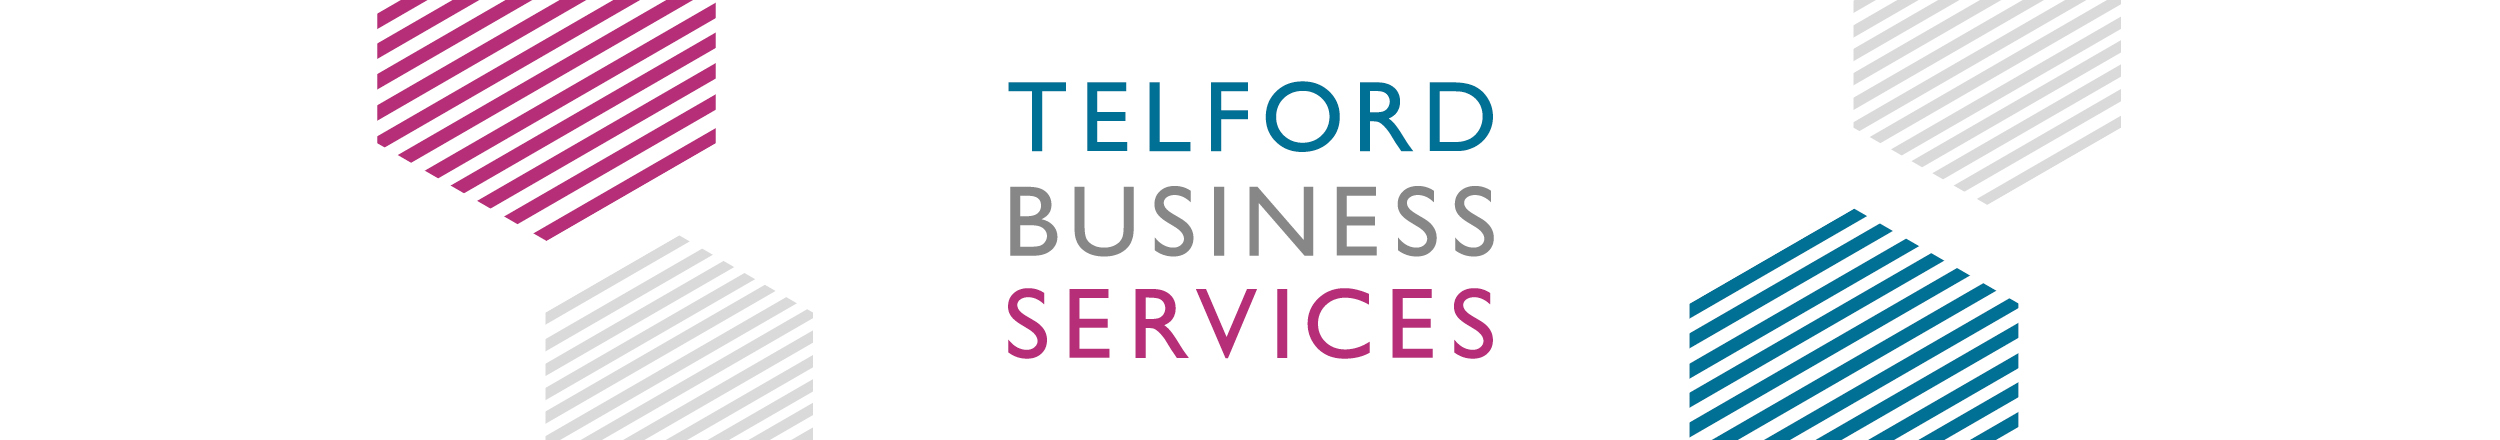 Telford Business Services logo